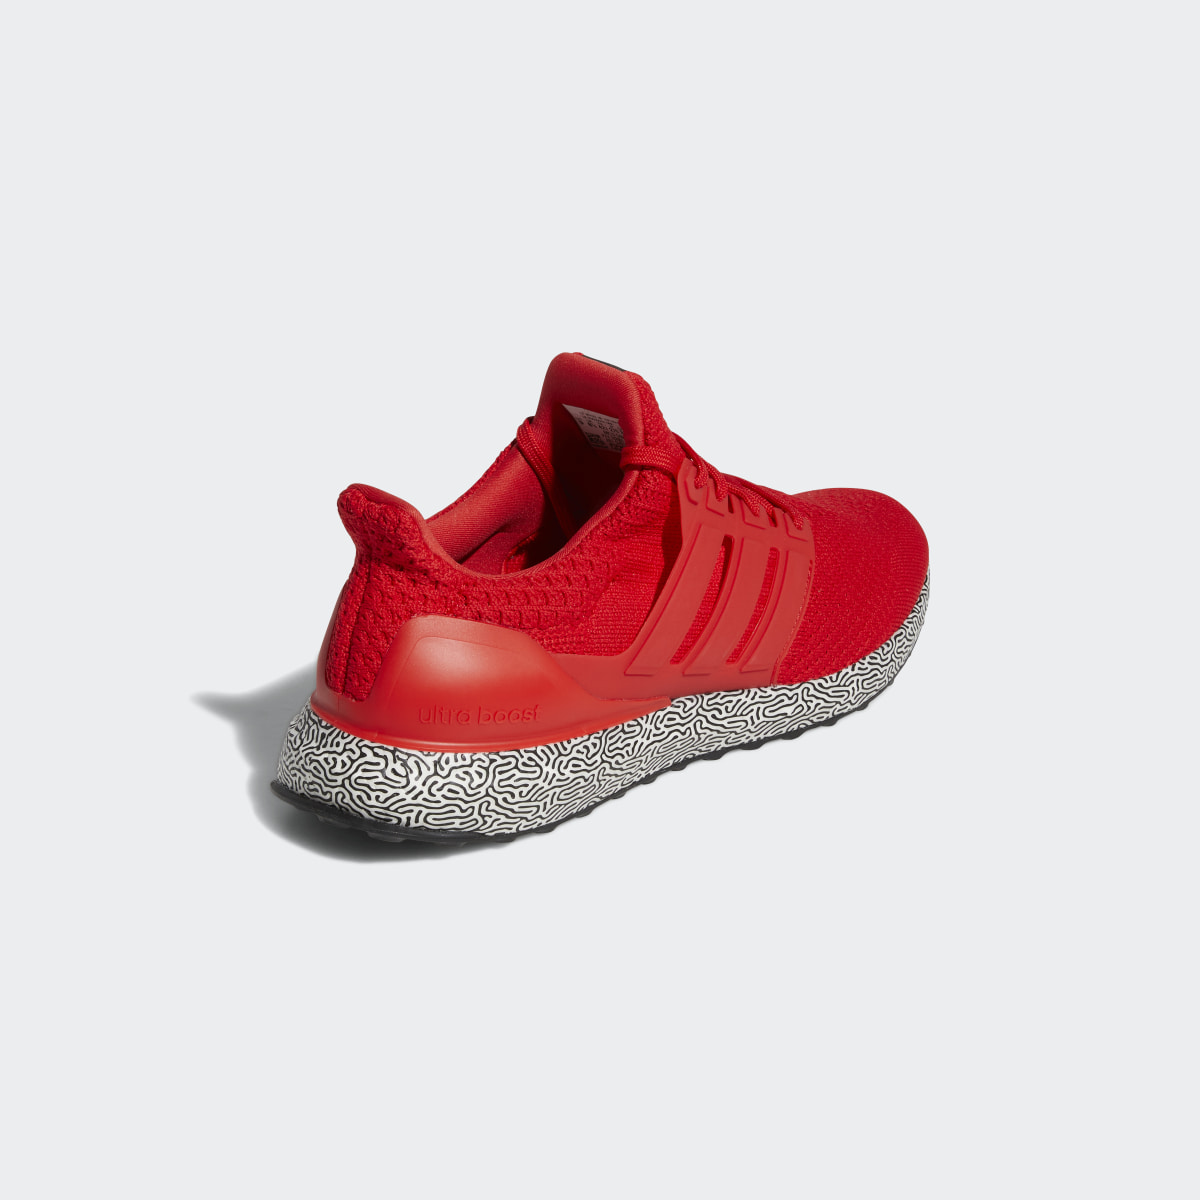 Adidas ULTRABOOST DNA SHOES. 6